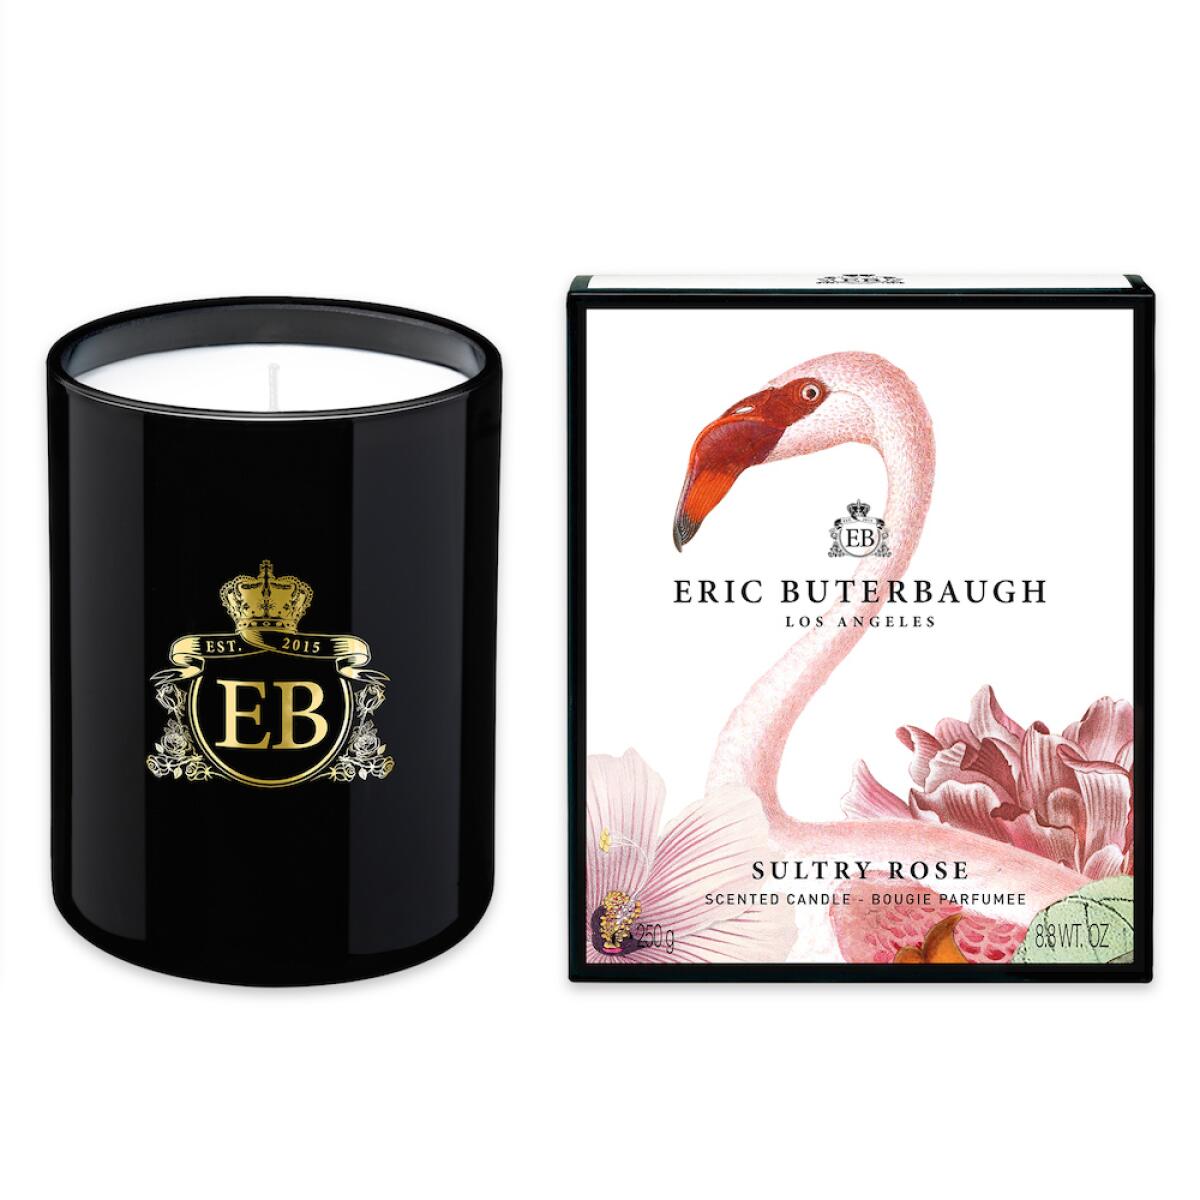 A photo of a the Sultry Rose scented candle from Eric Buterbaugh Los Angeles.